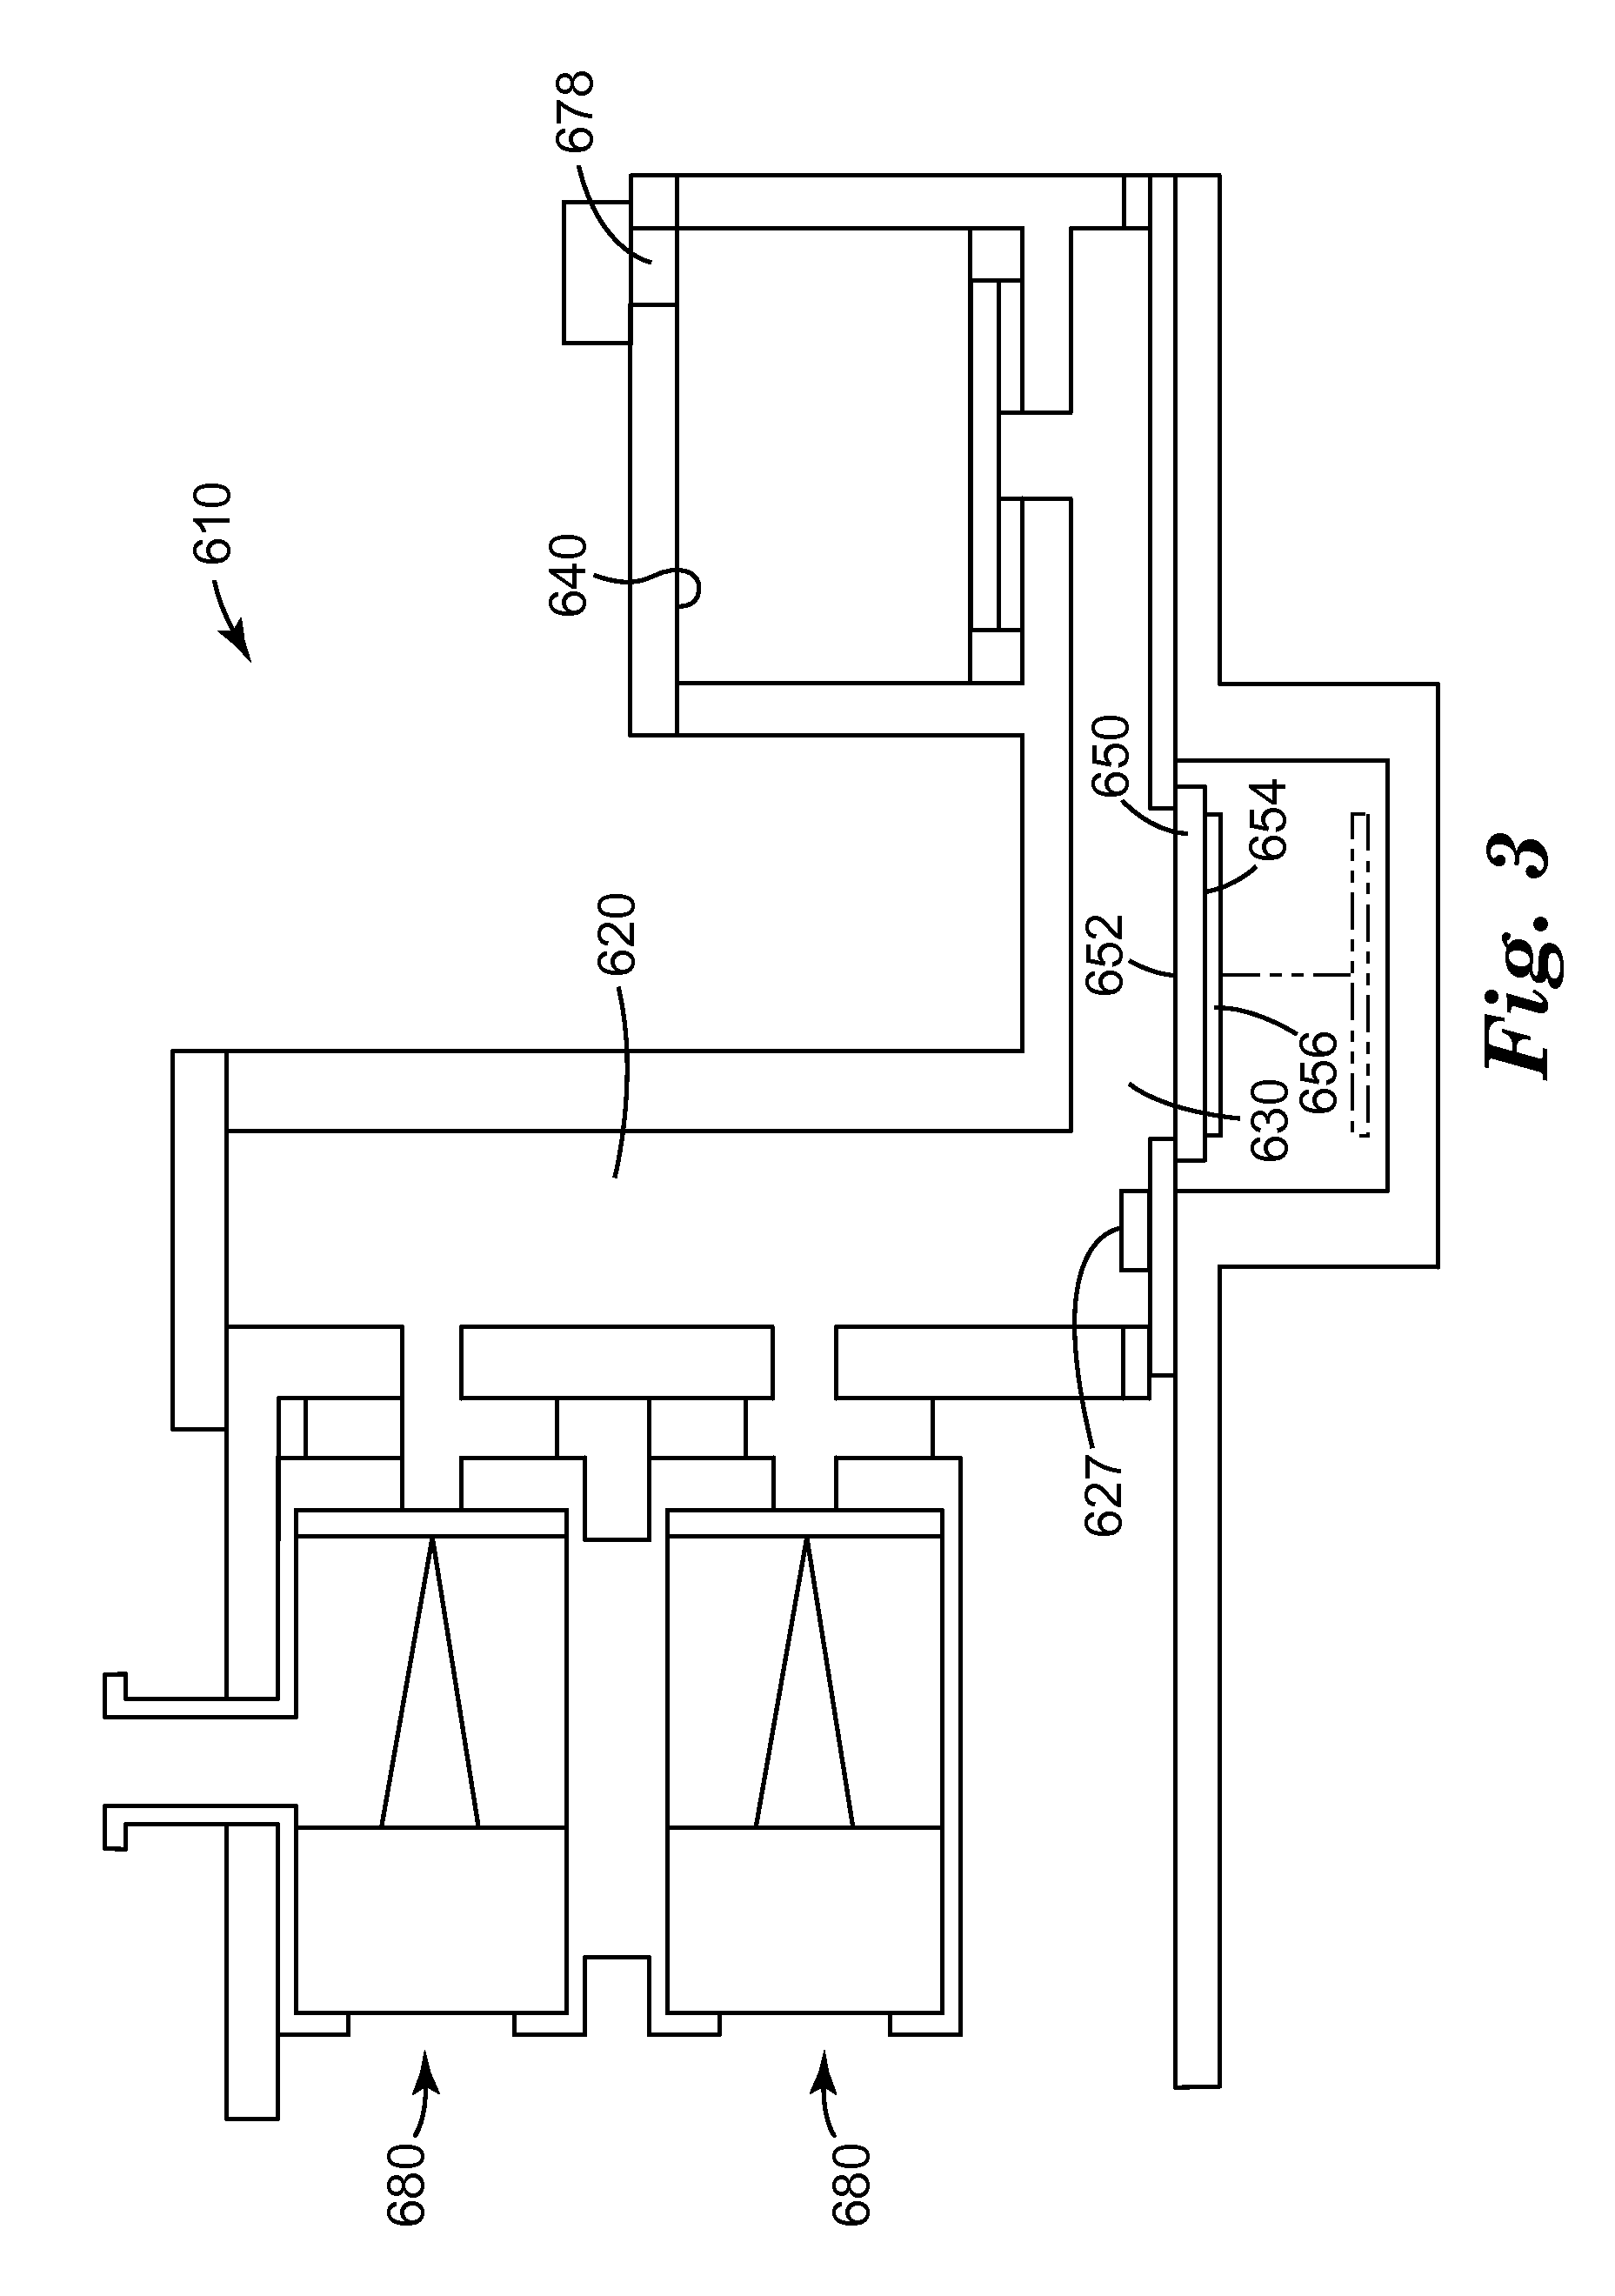 Methods of detection using acousto-mechanical detection systems